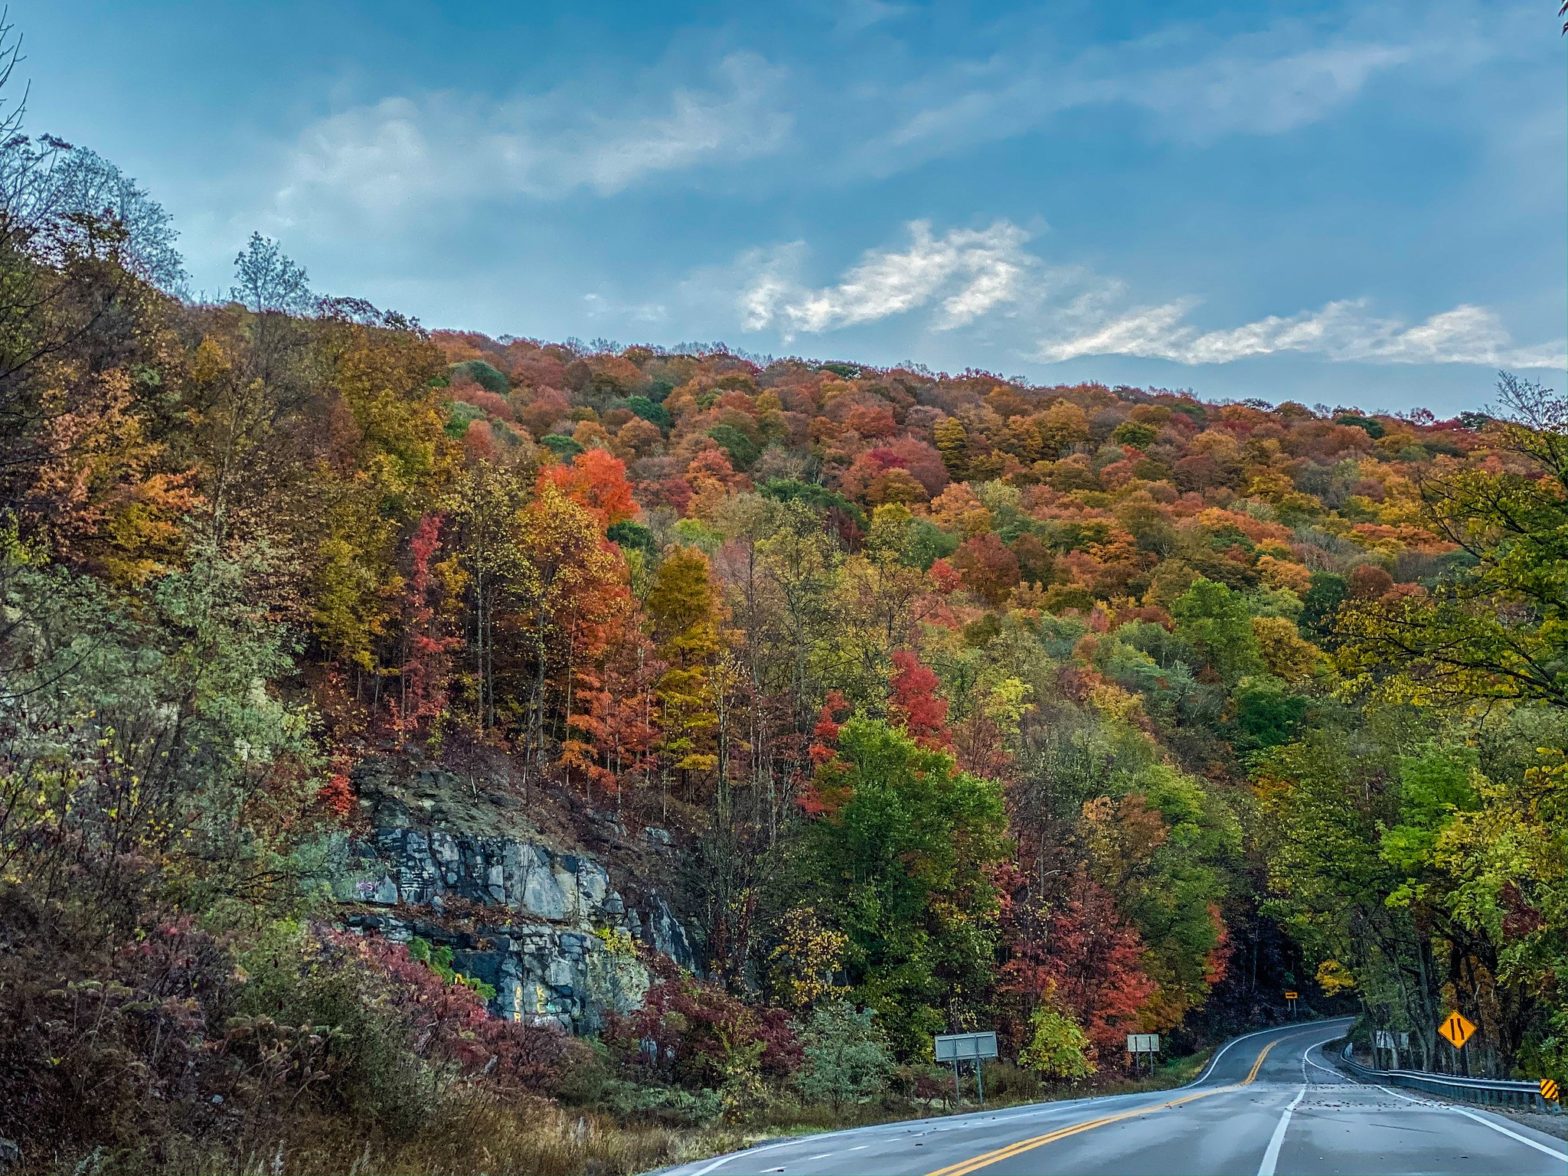 Randolph%20County%20Fall%20Foliage%20Update%20-%20Elkins-Randolph%20County%20Tourism